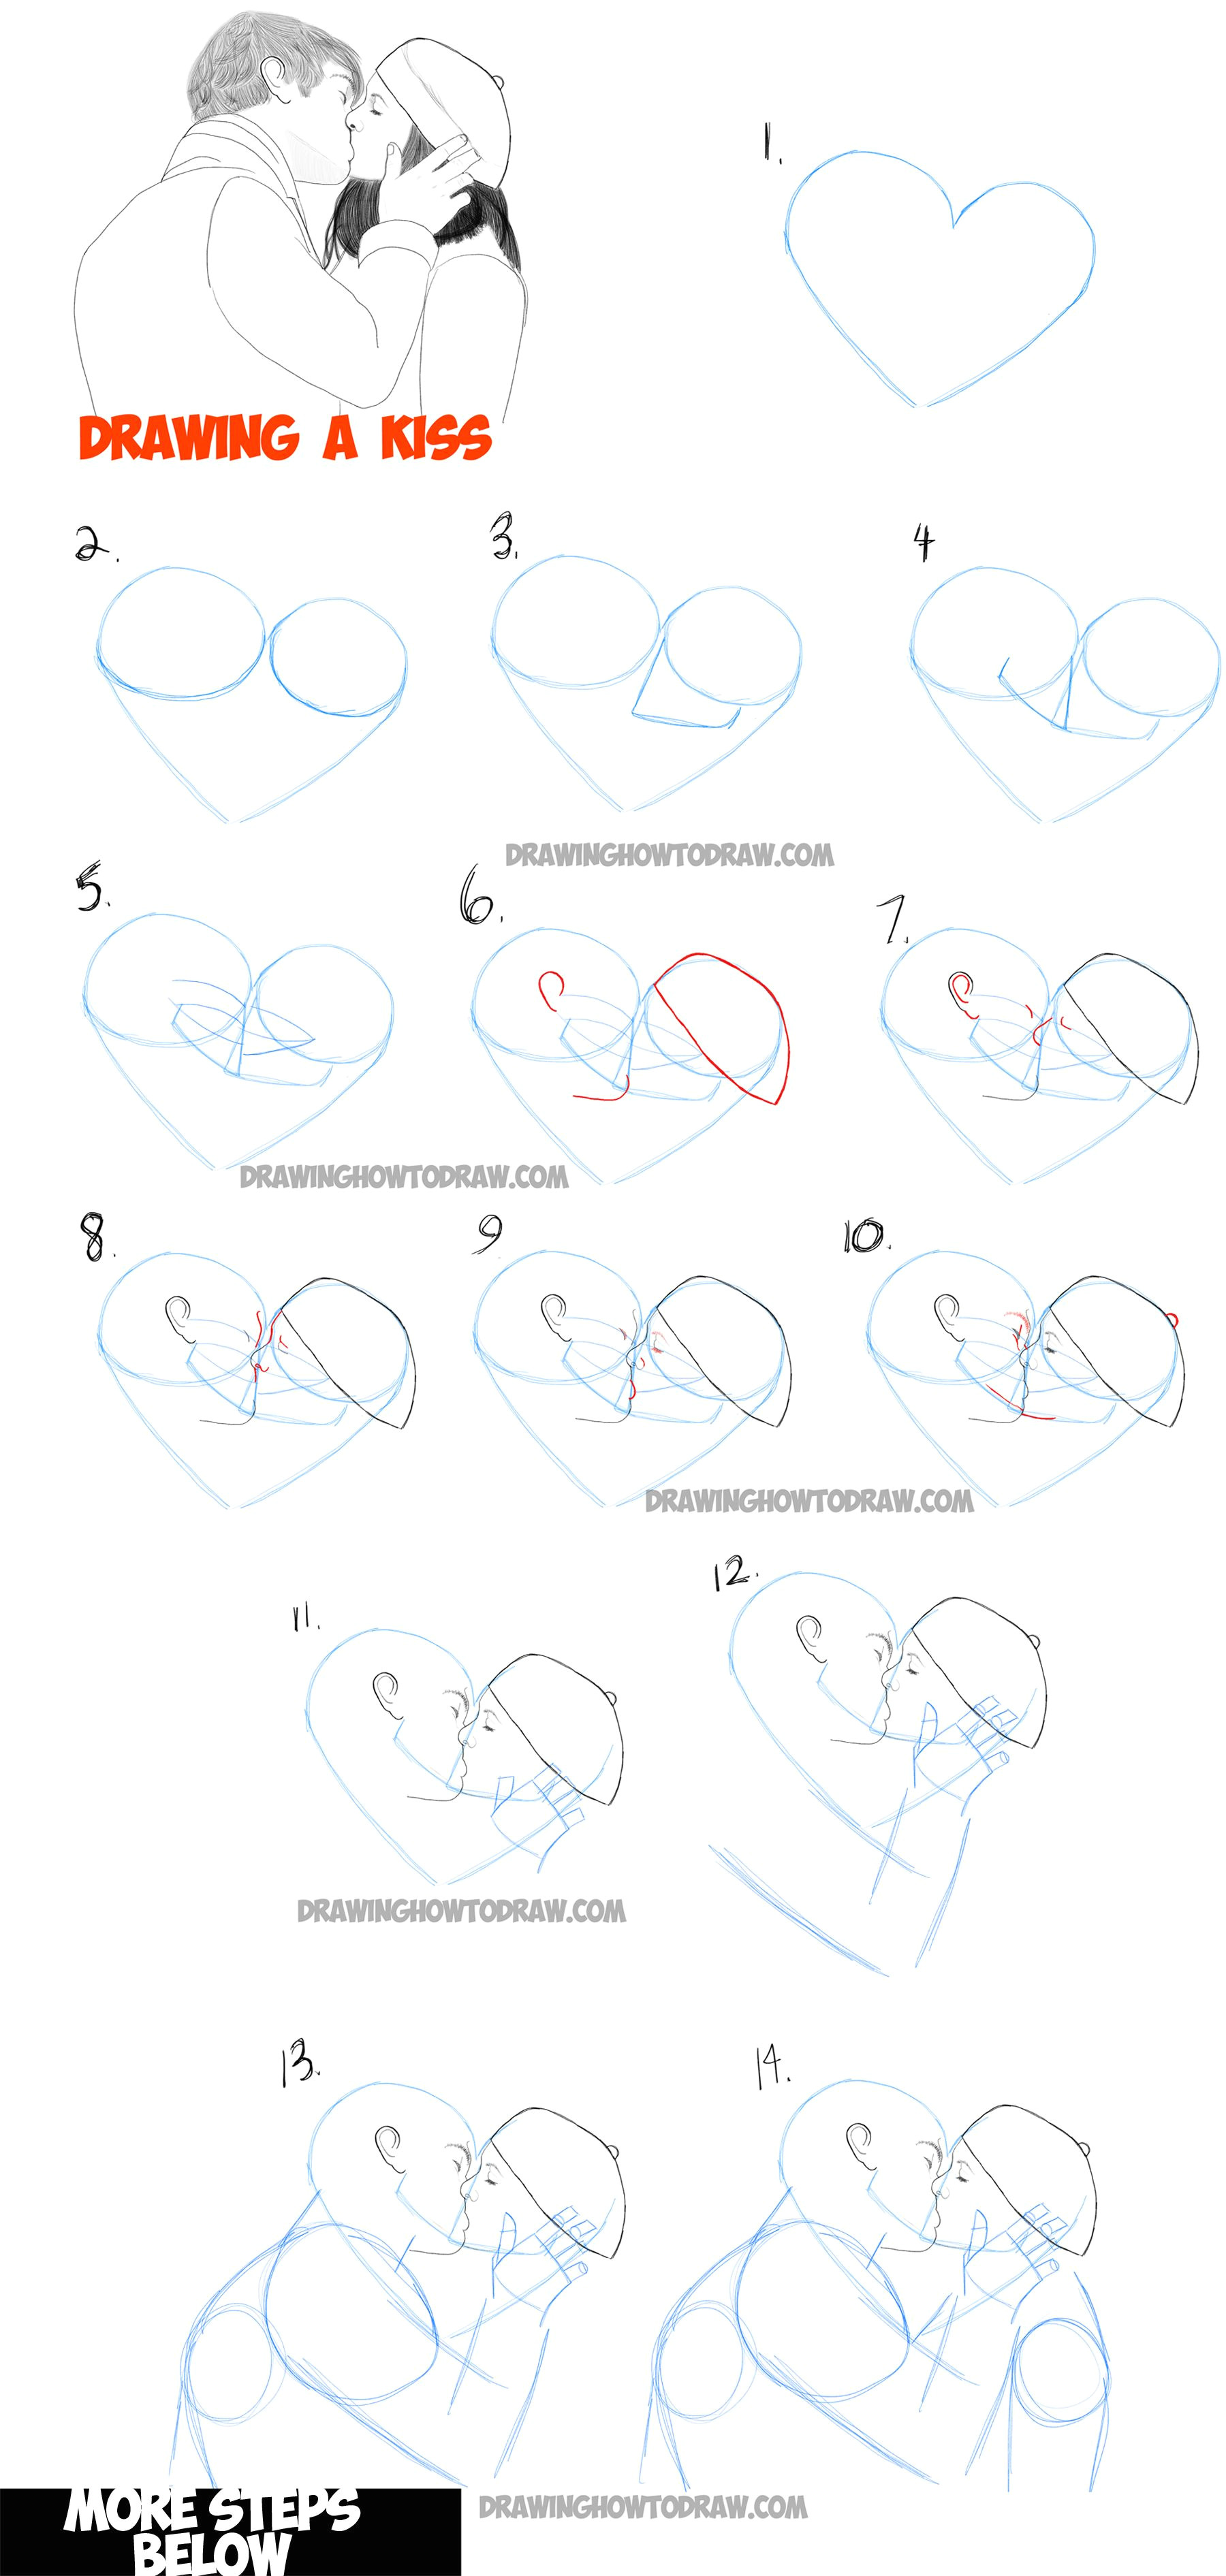 Drawing Ideas with Steps How to Draw Romantic Kisses Between Two Lovers Step by Step